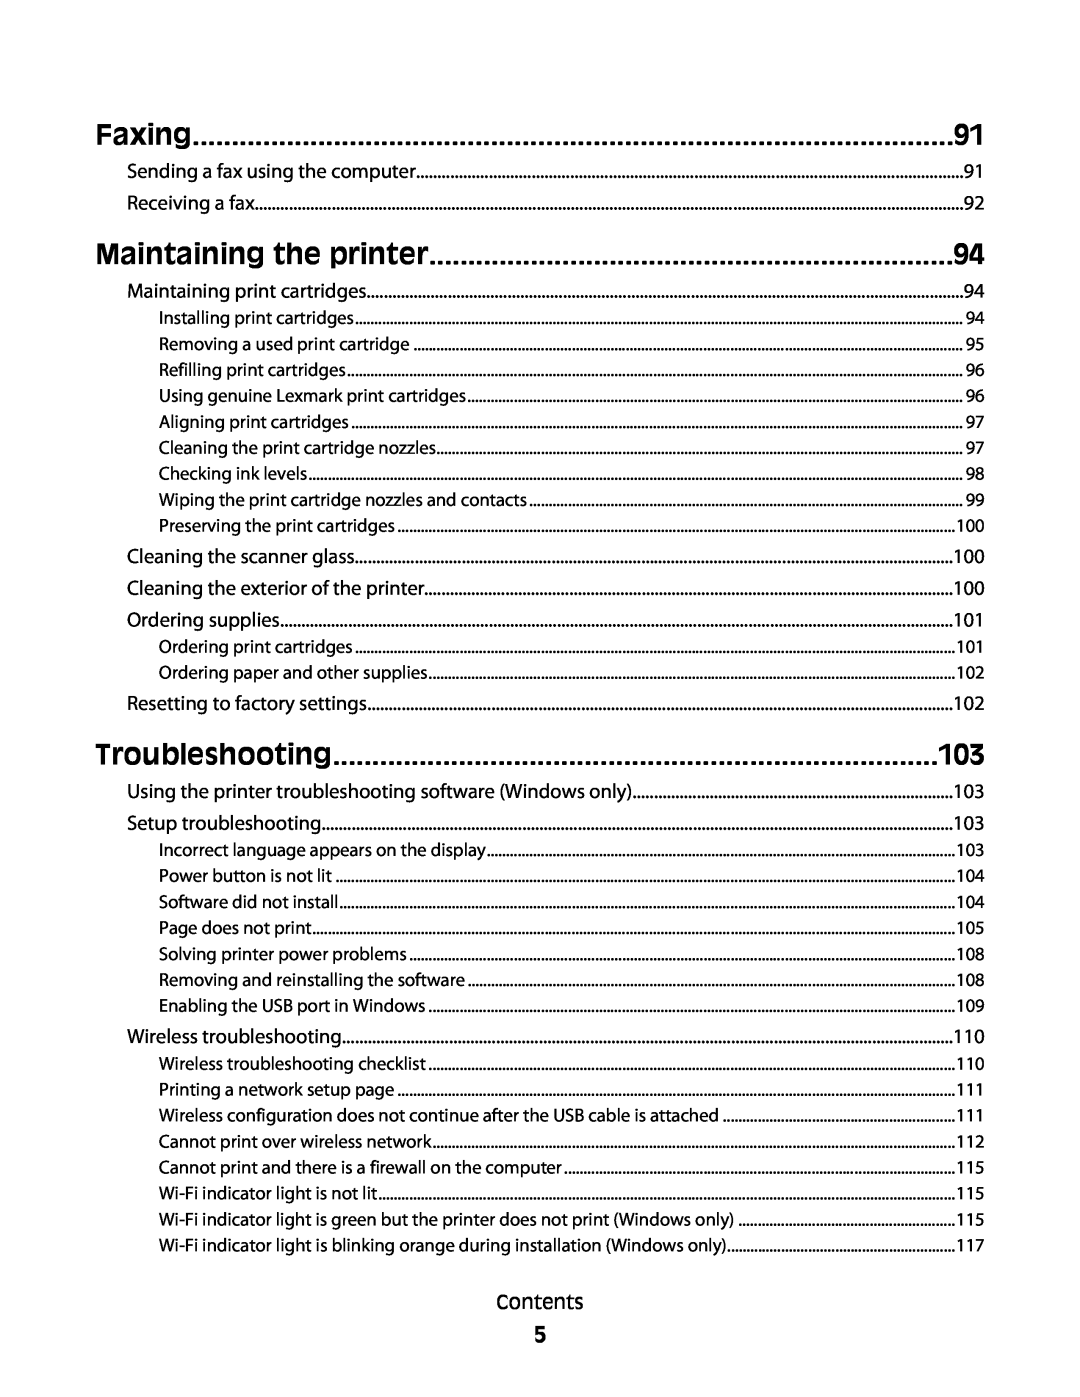 Lexmark 3600, 4600 manual Maintaining the printer, Troubleshooting, Faxing 